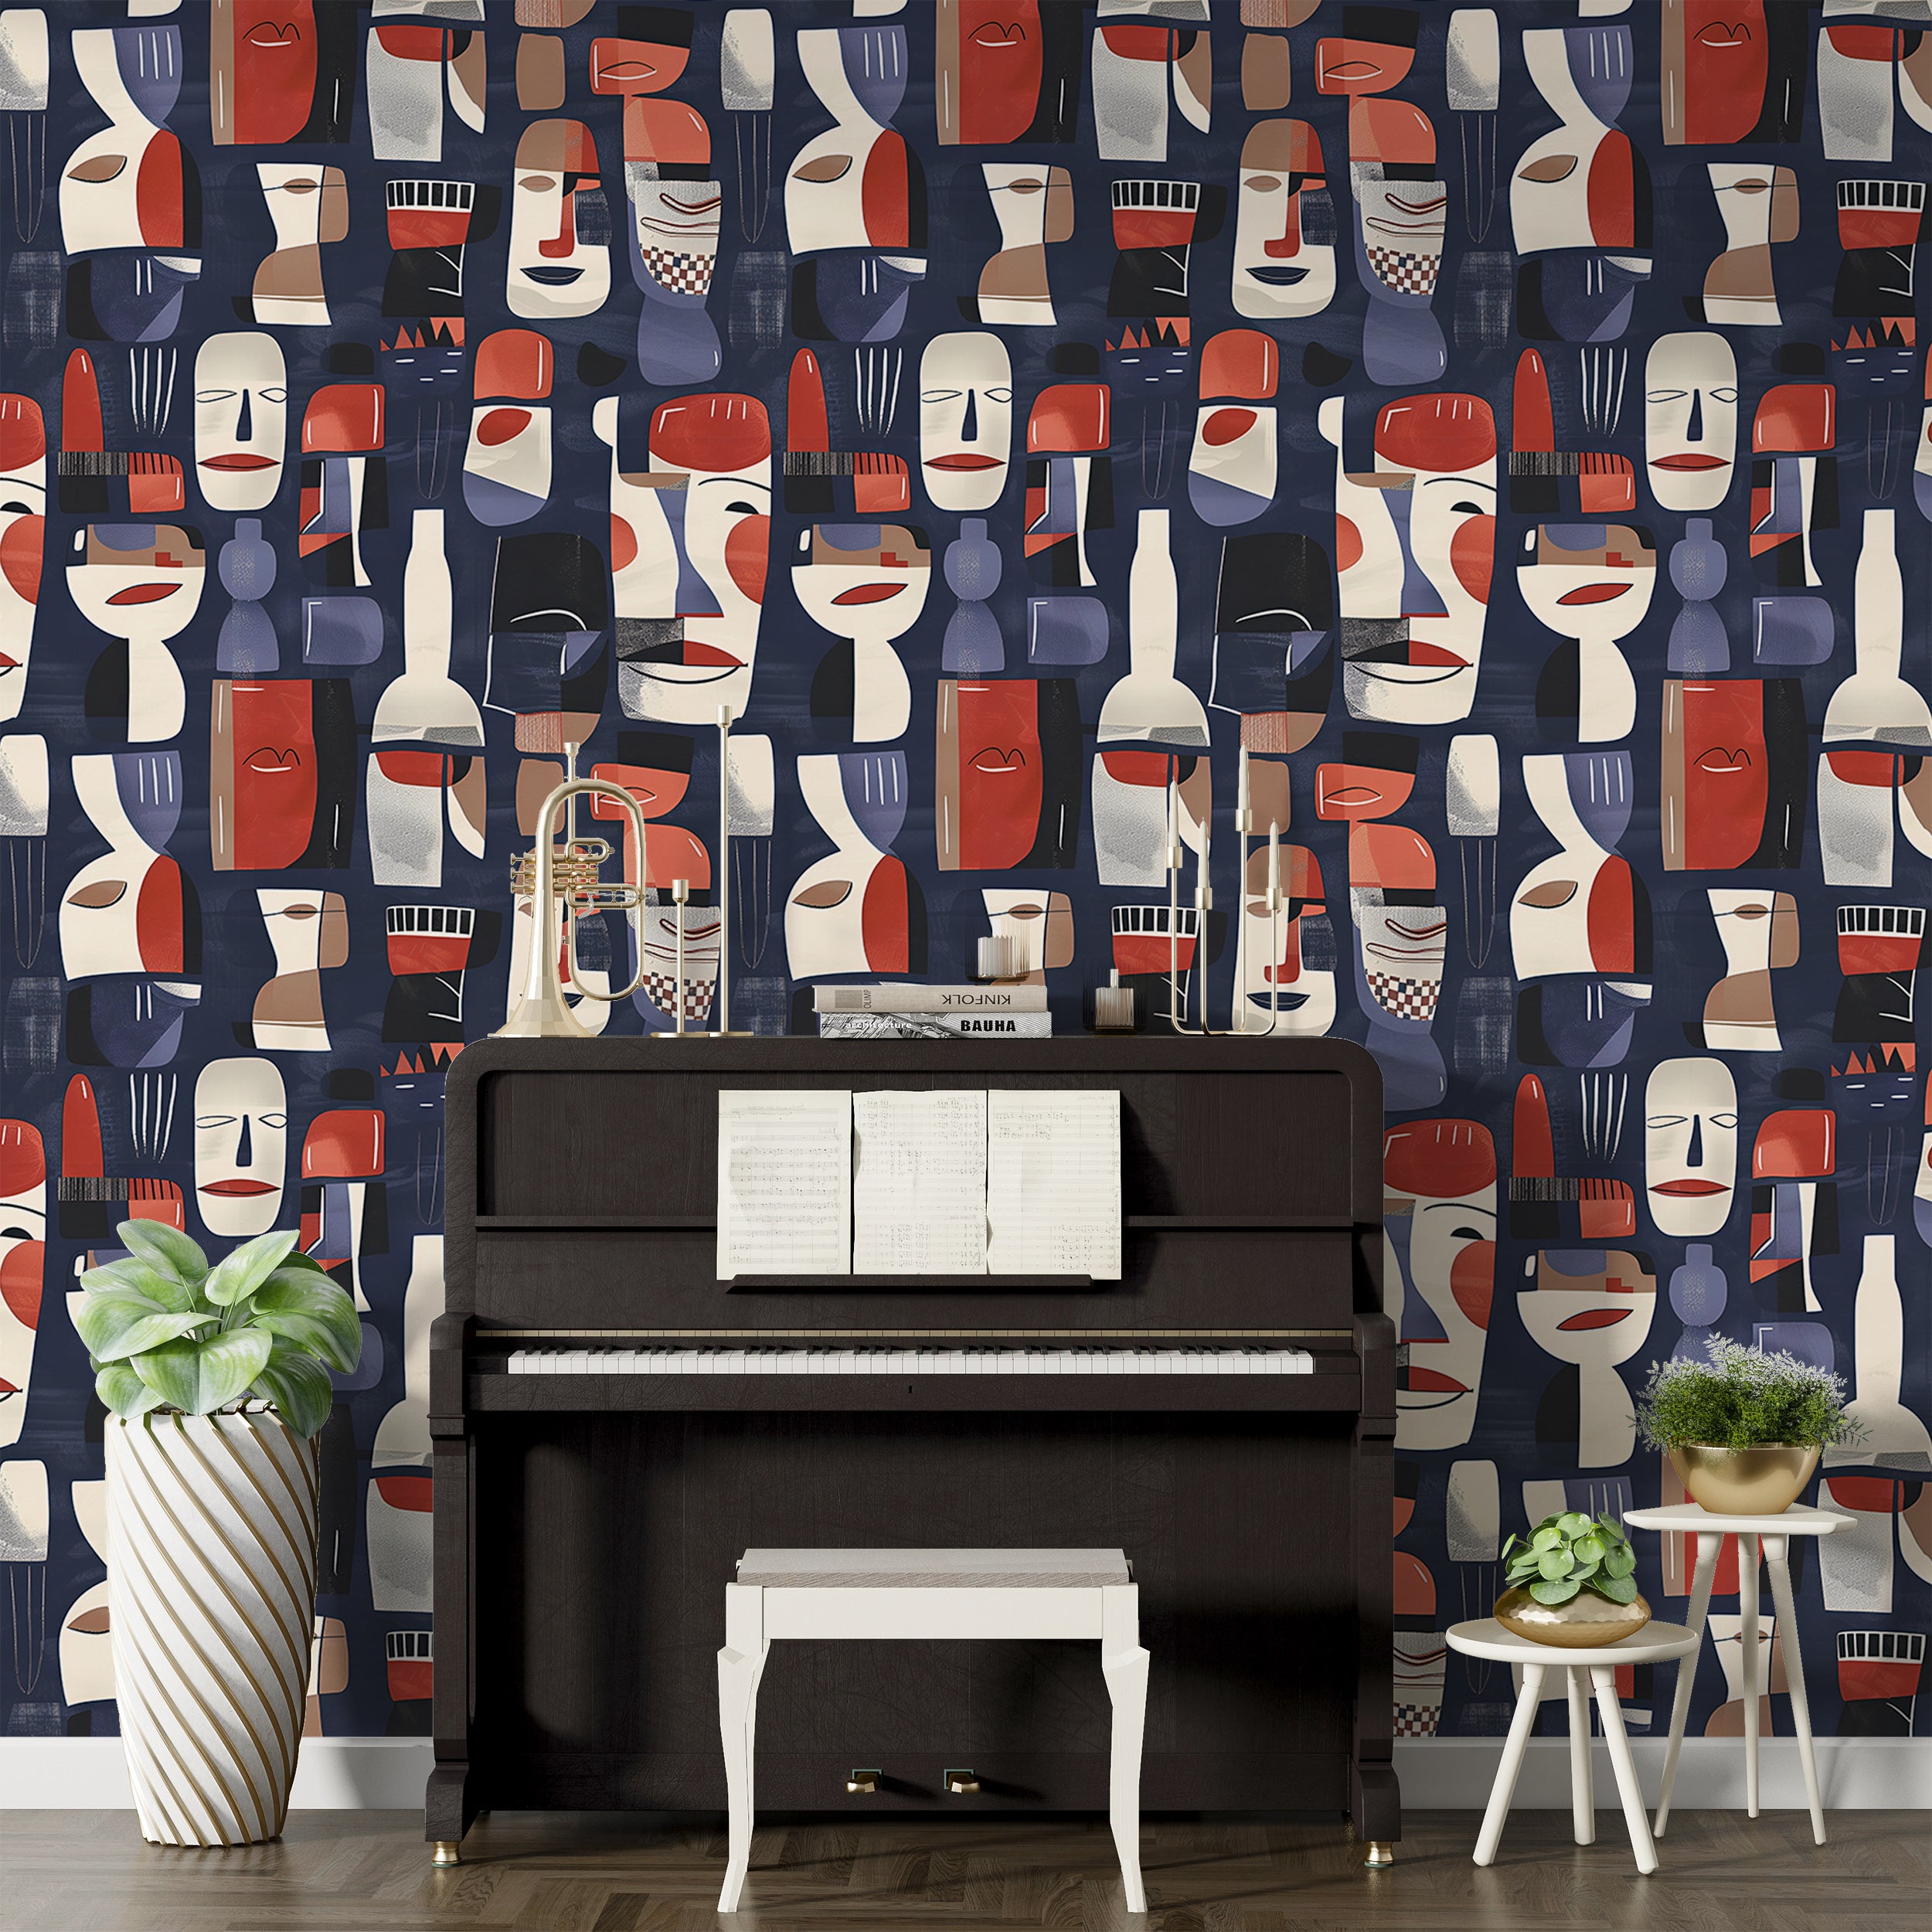 Perfect for adding an artistic flair to any room, this removable wallpaper is easy to apply and remove, making it an ideal choice for renters and those who love to change their decor frequently. Enhance your interiors with this stylish and eye-catching modern wallpaper.